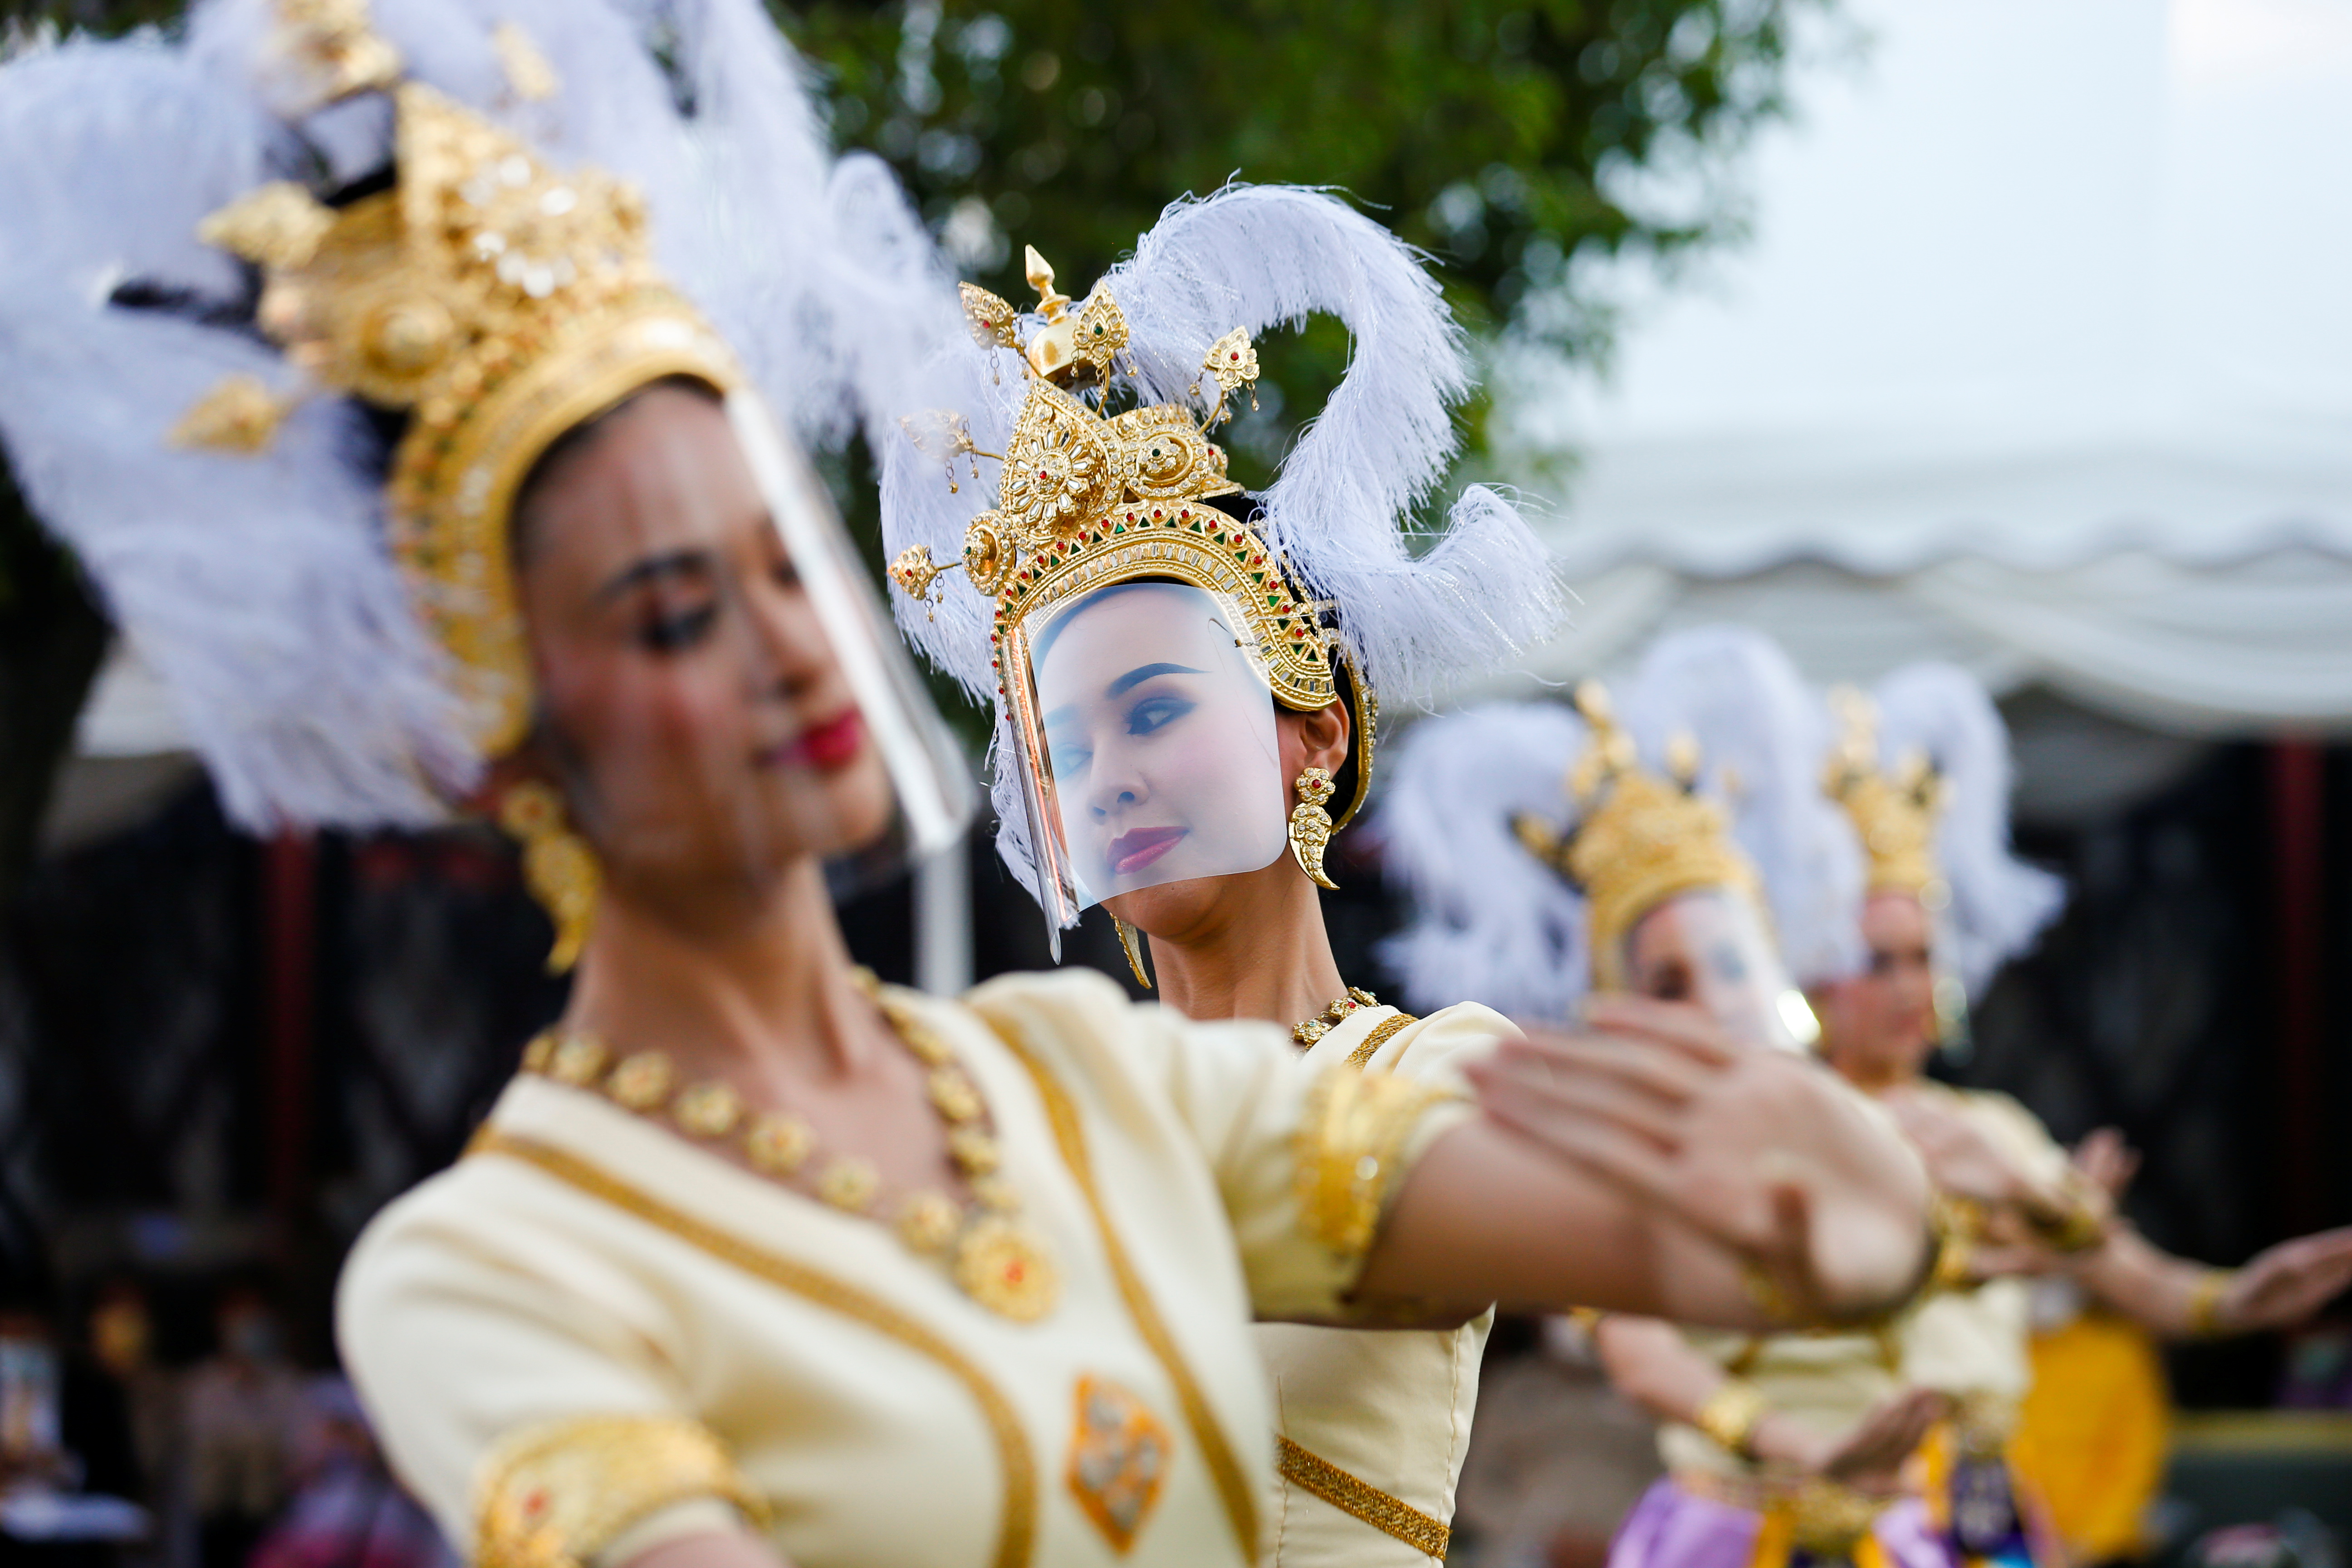 Ceremony to celebrate the return of two ancient relics held by the Bangkok National Museum